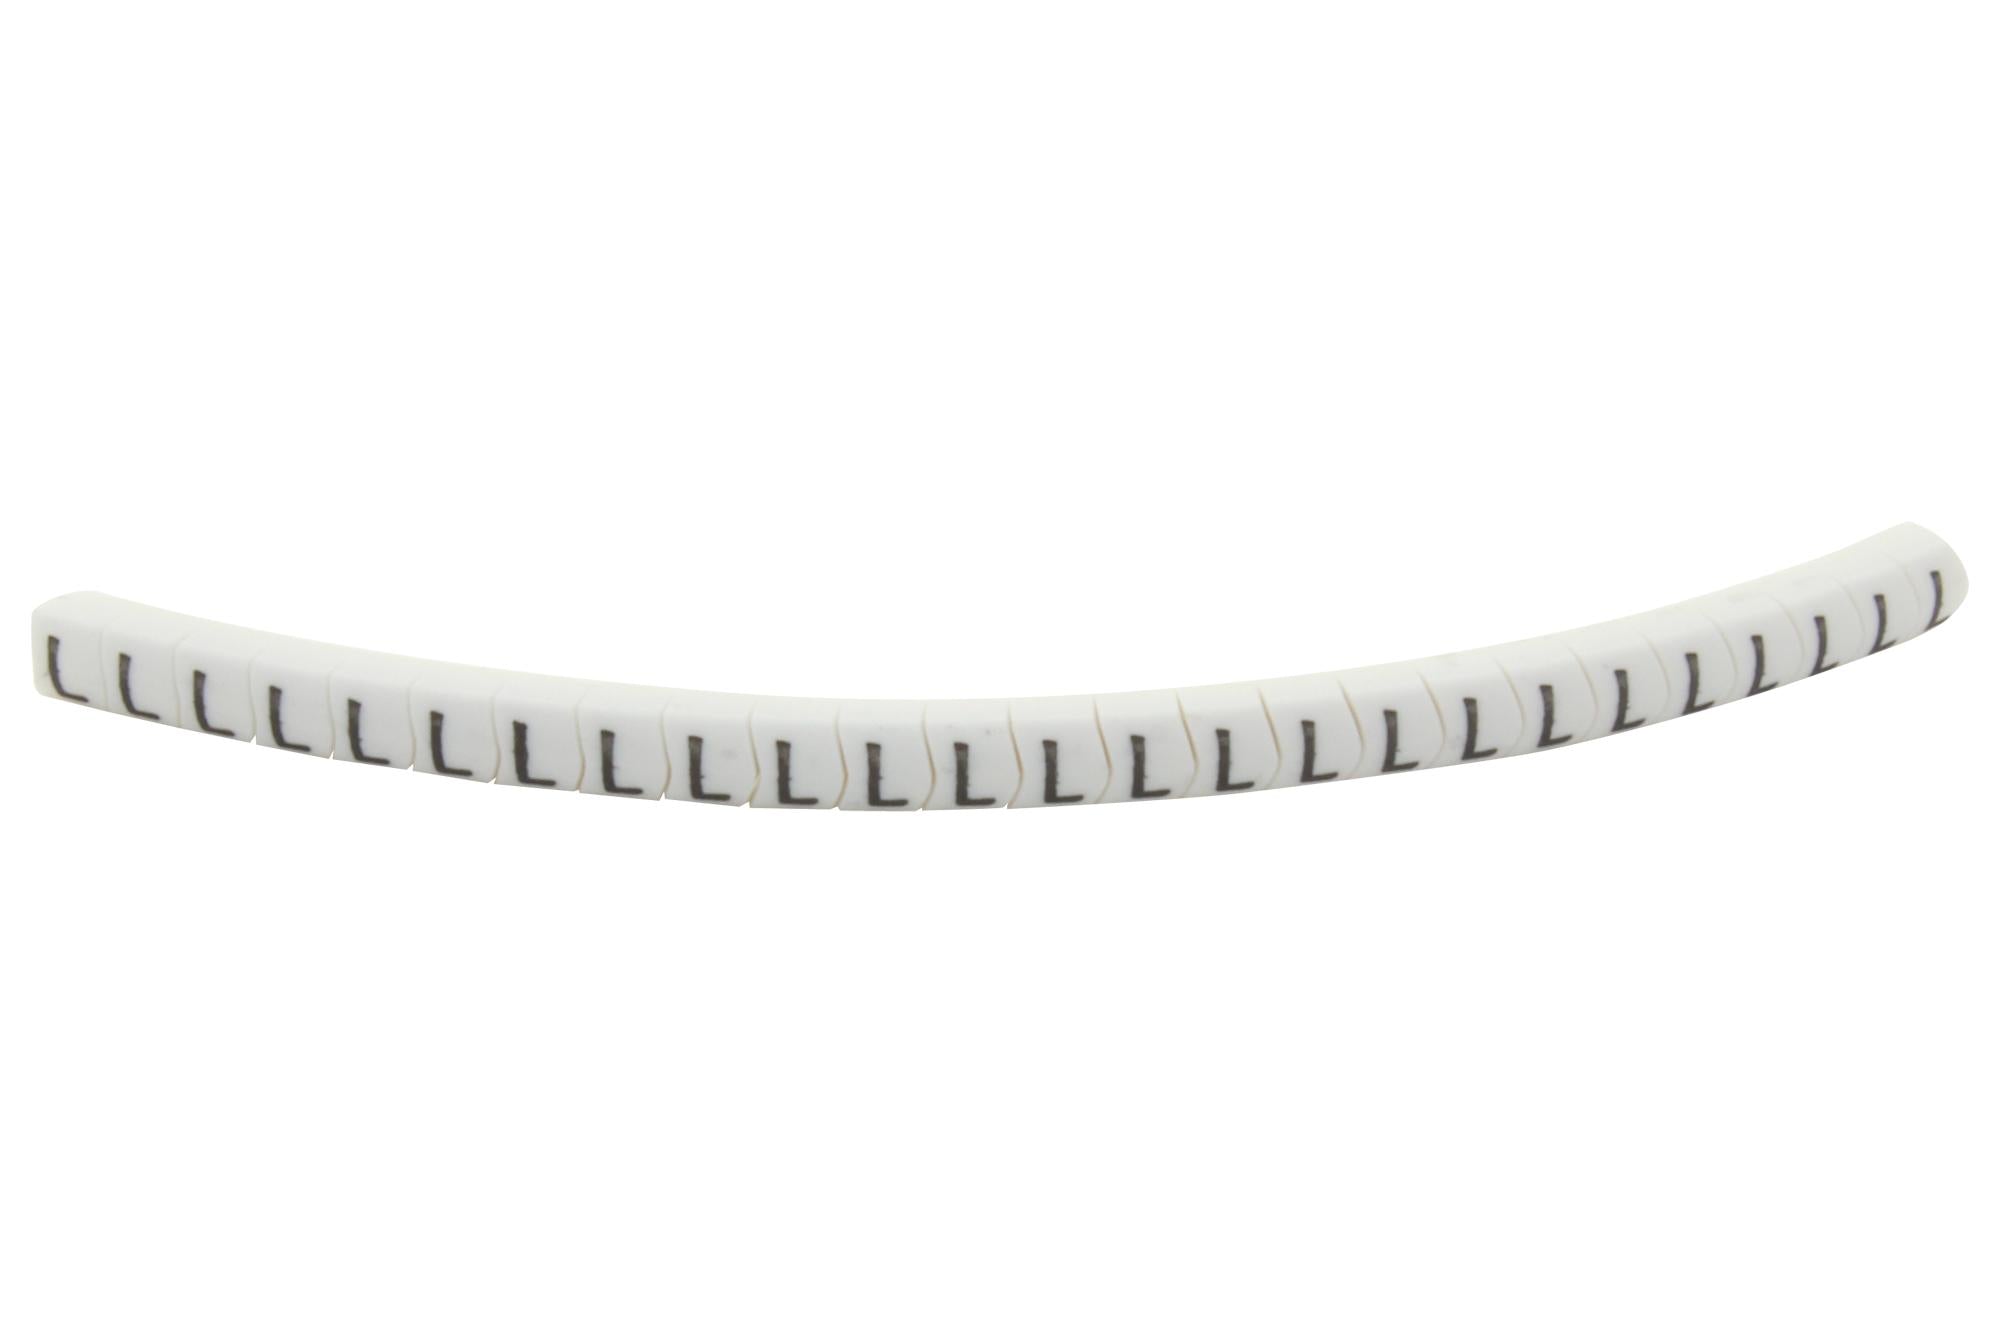 901-11085 CABLE MARKER, PRE PRINTED, PVC, WHITE HELLERMANNTYTON